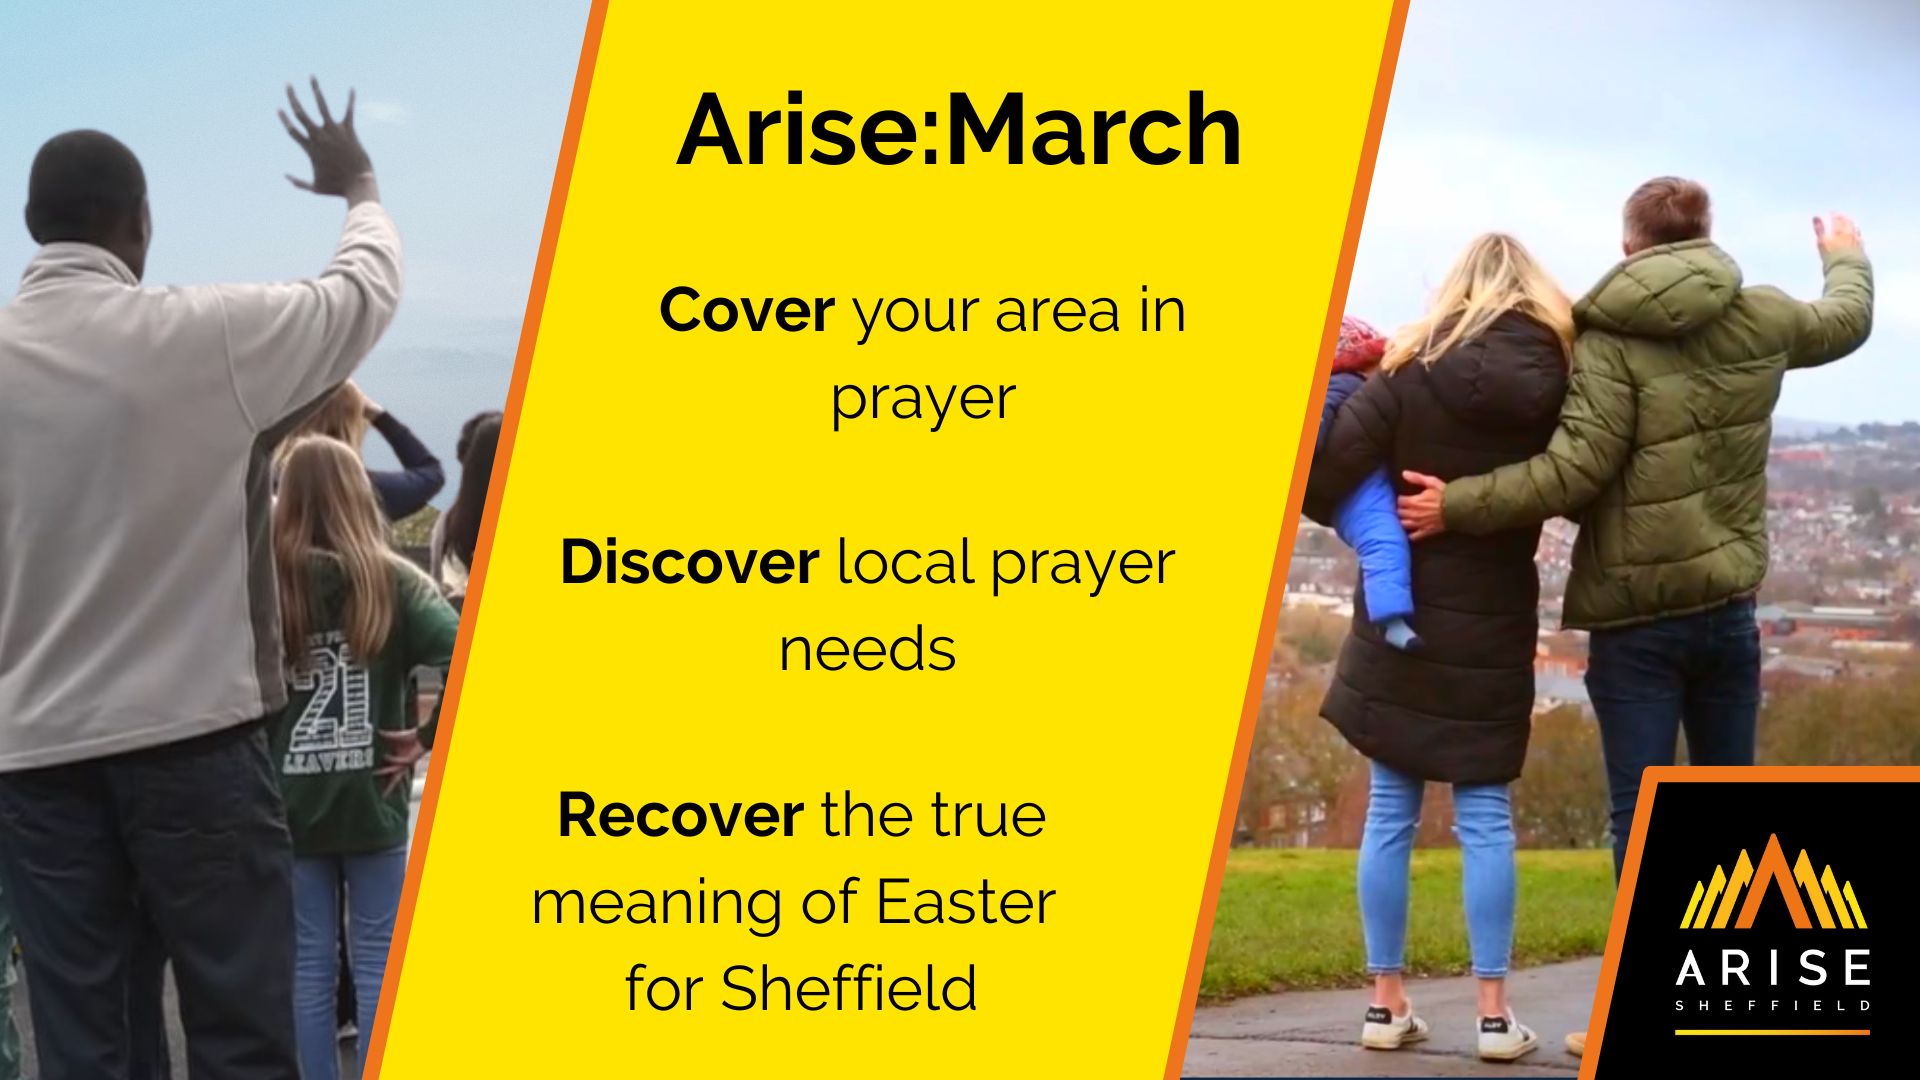 Arise March Cover your local area in prayer, using the special Arise prayer app. The streets will glow brighter with every blessing. Discover the prayer needs in your local area, and share them with Arisers through the app. Recover the true meaning of Easter for Sheffield, by giving Easter cards and Easter eggs to your neighbours.